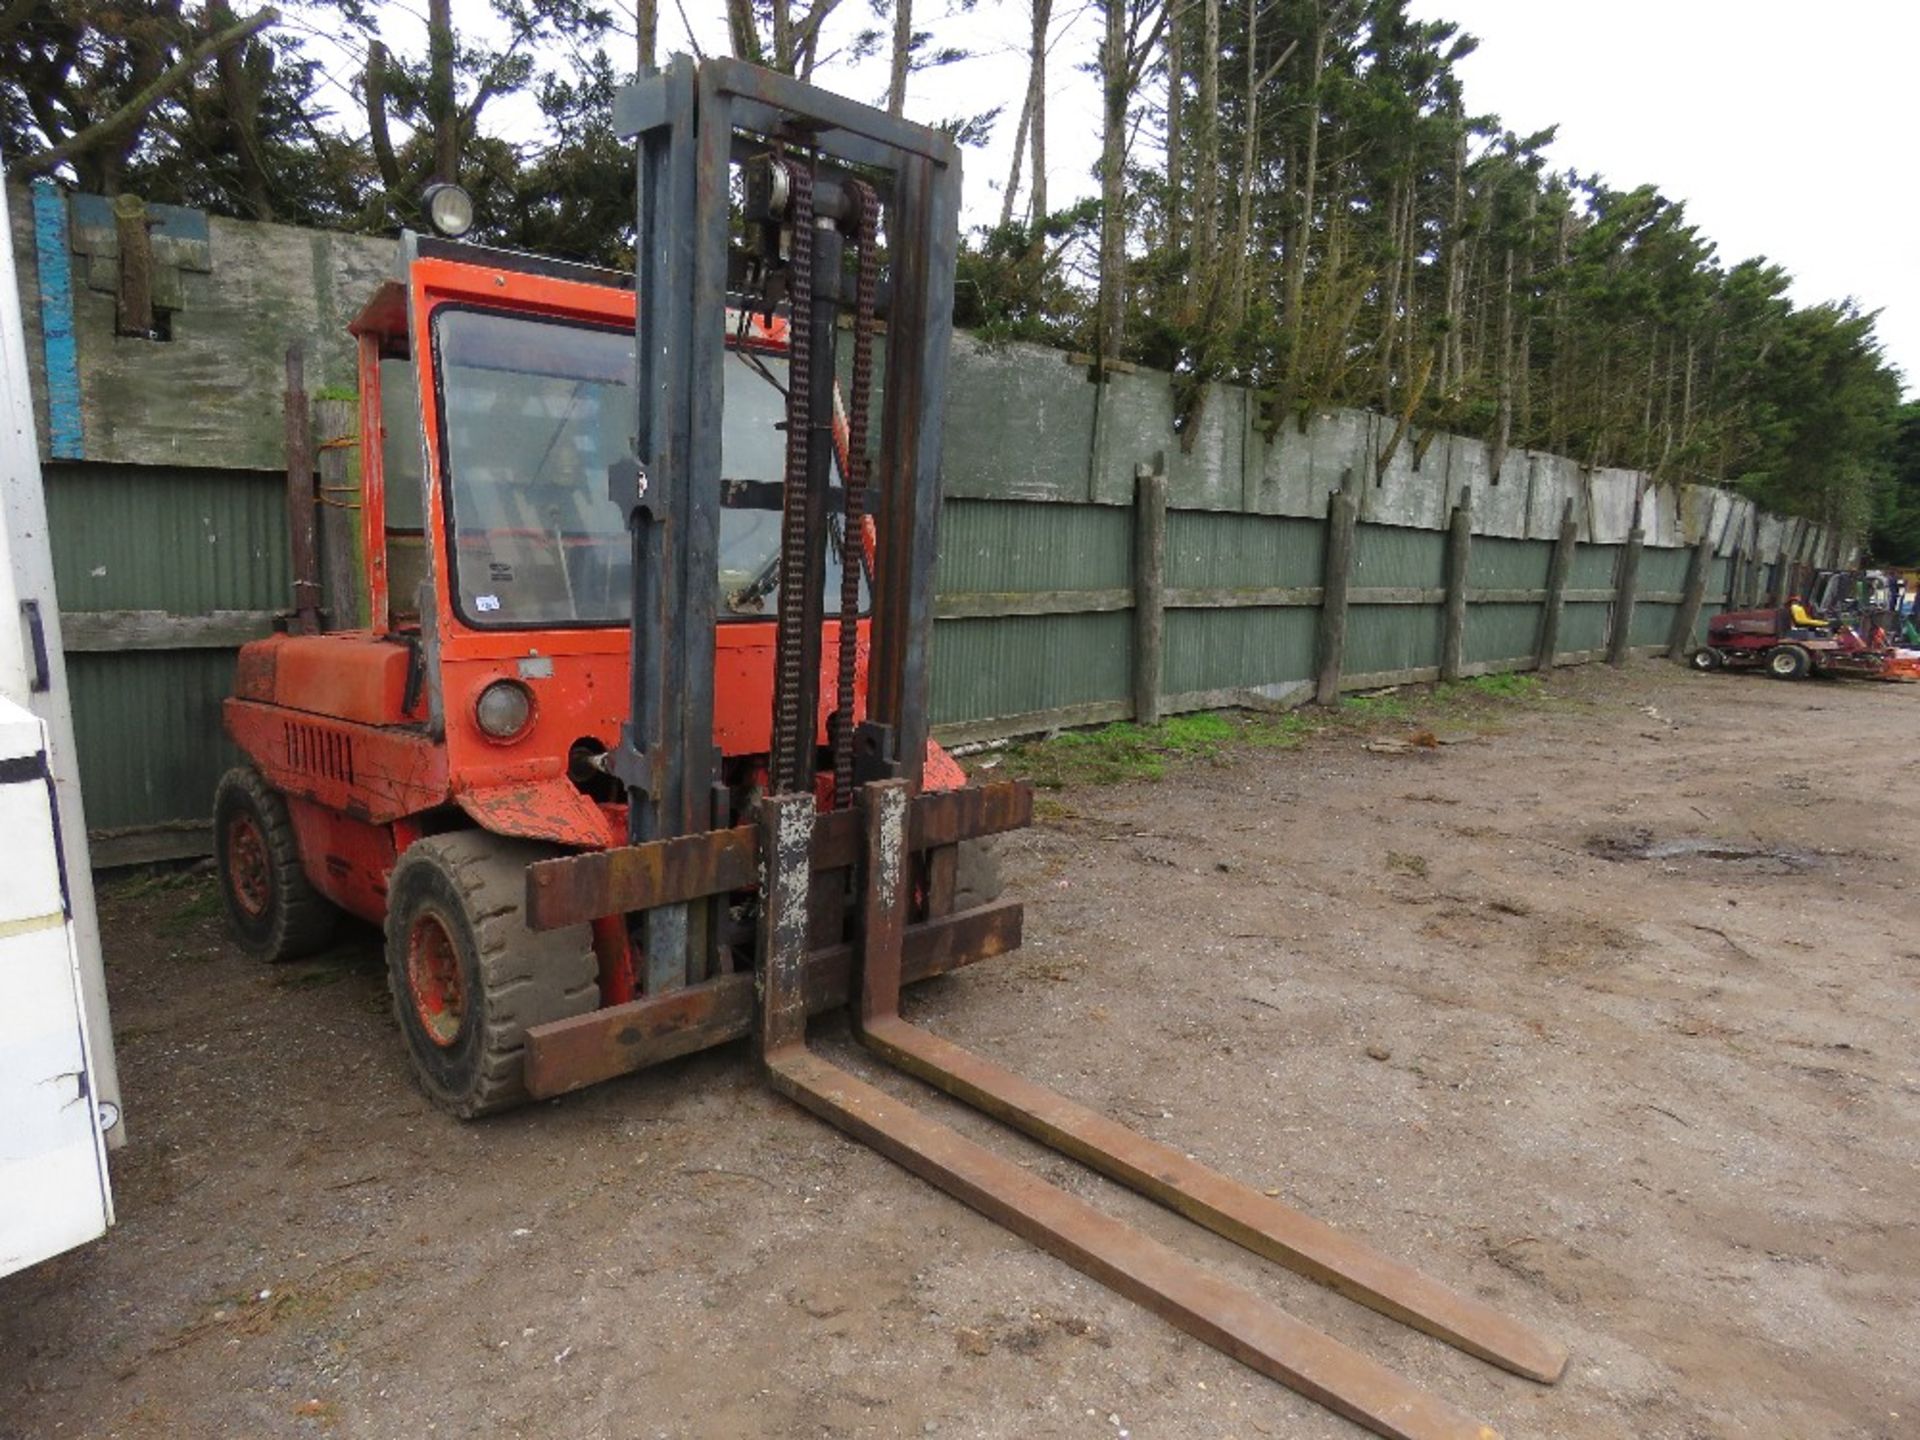 LINDE 6 TONNE DIESEL ENGINED FORKLIFT TRUCK WITH 7FT TINES FITTED. WHEN TESTED WAS SEEN TO RUN, DRIV - Image 2 of 12